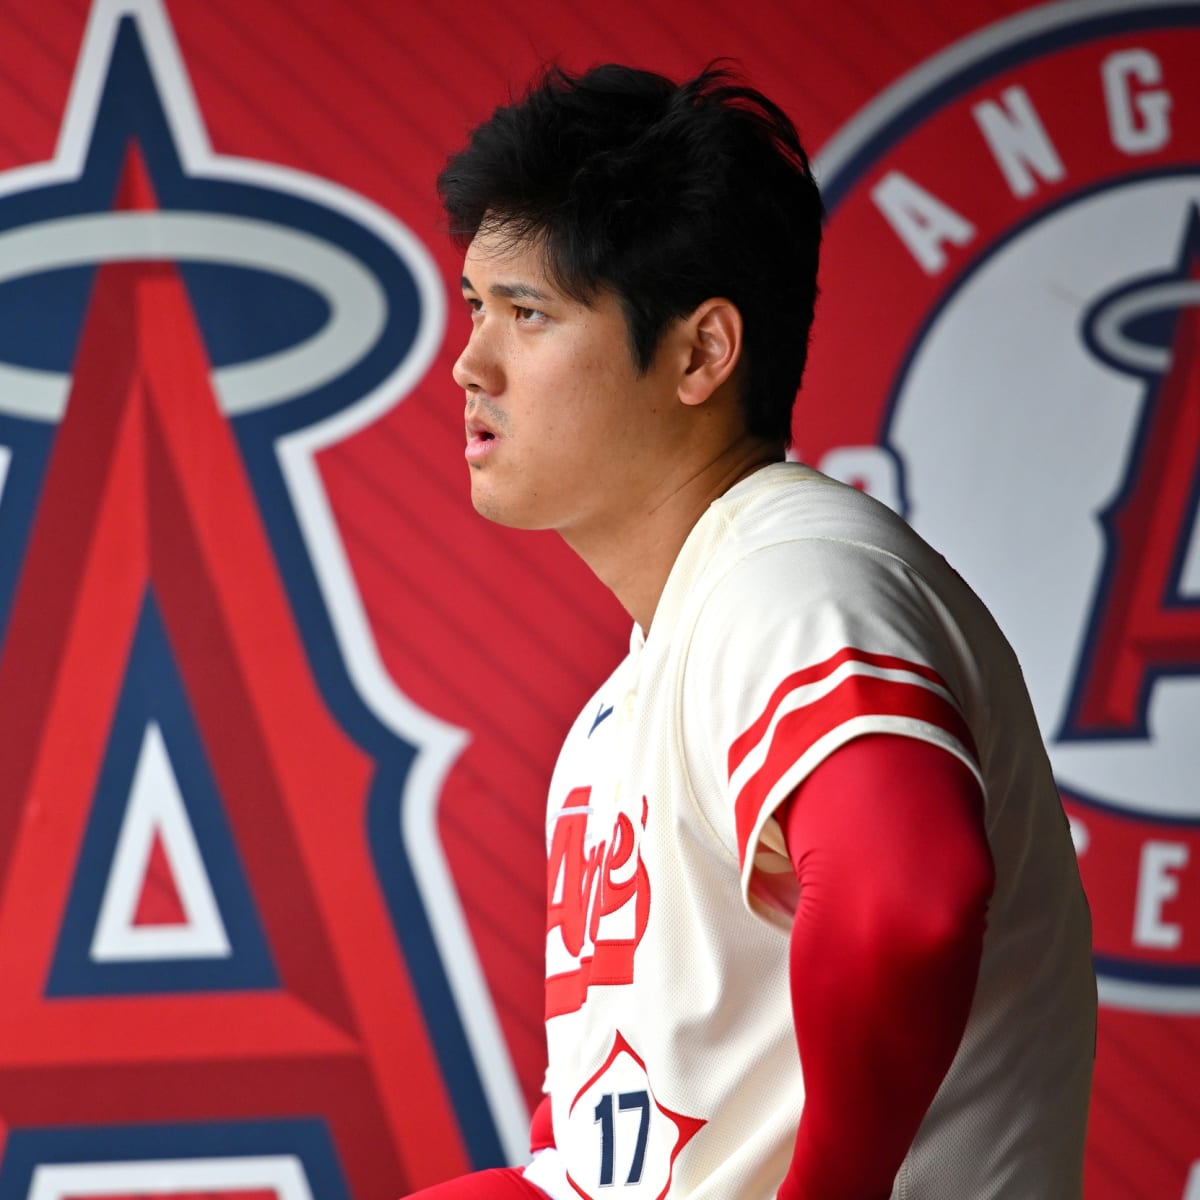 Fans dazzled by Shohei Ohtani's electric no-helmet homerun vs Rangers: Man  is out of this world